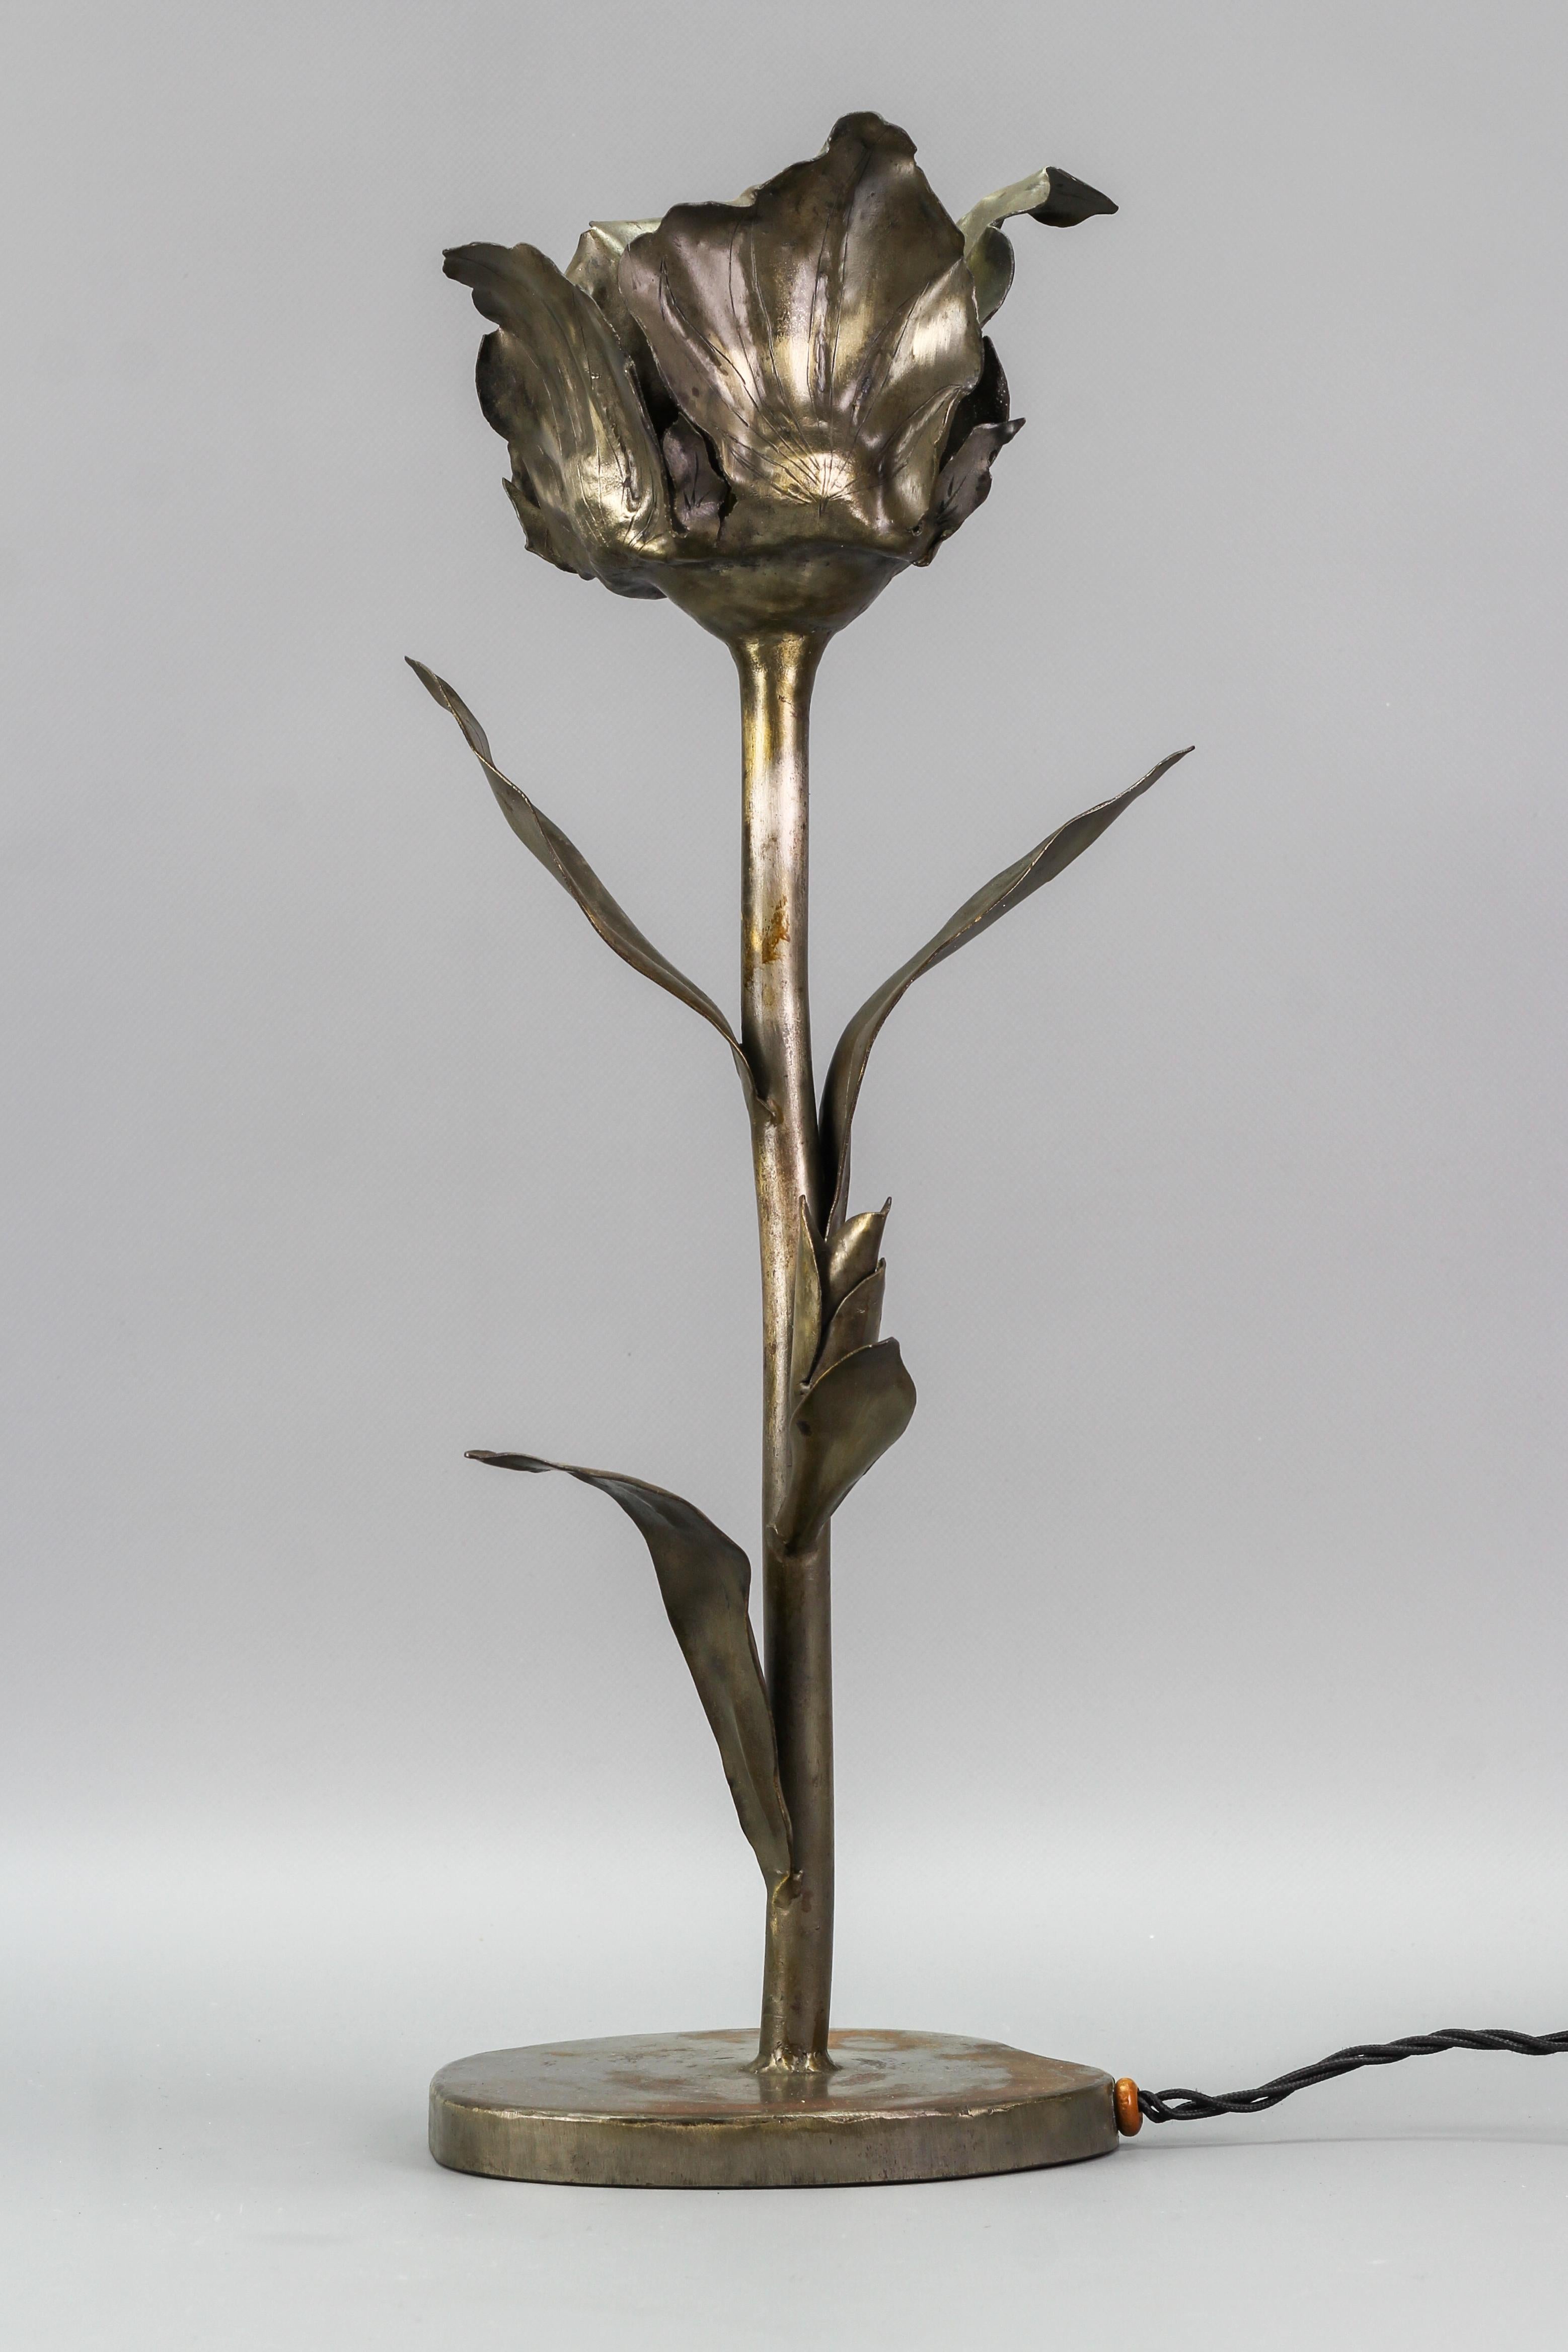 Unique and impressive hand-made Mid-Century Modern metal table lamp in the shape of a large flower with bud and leaves; signed 